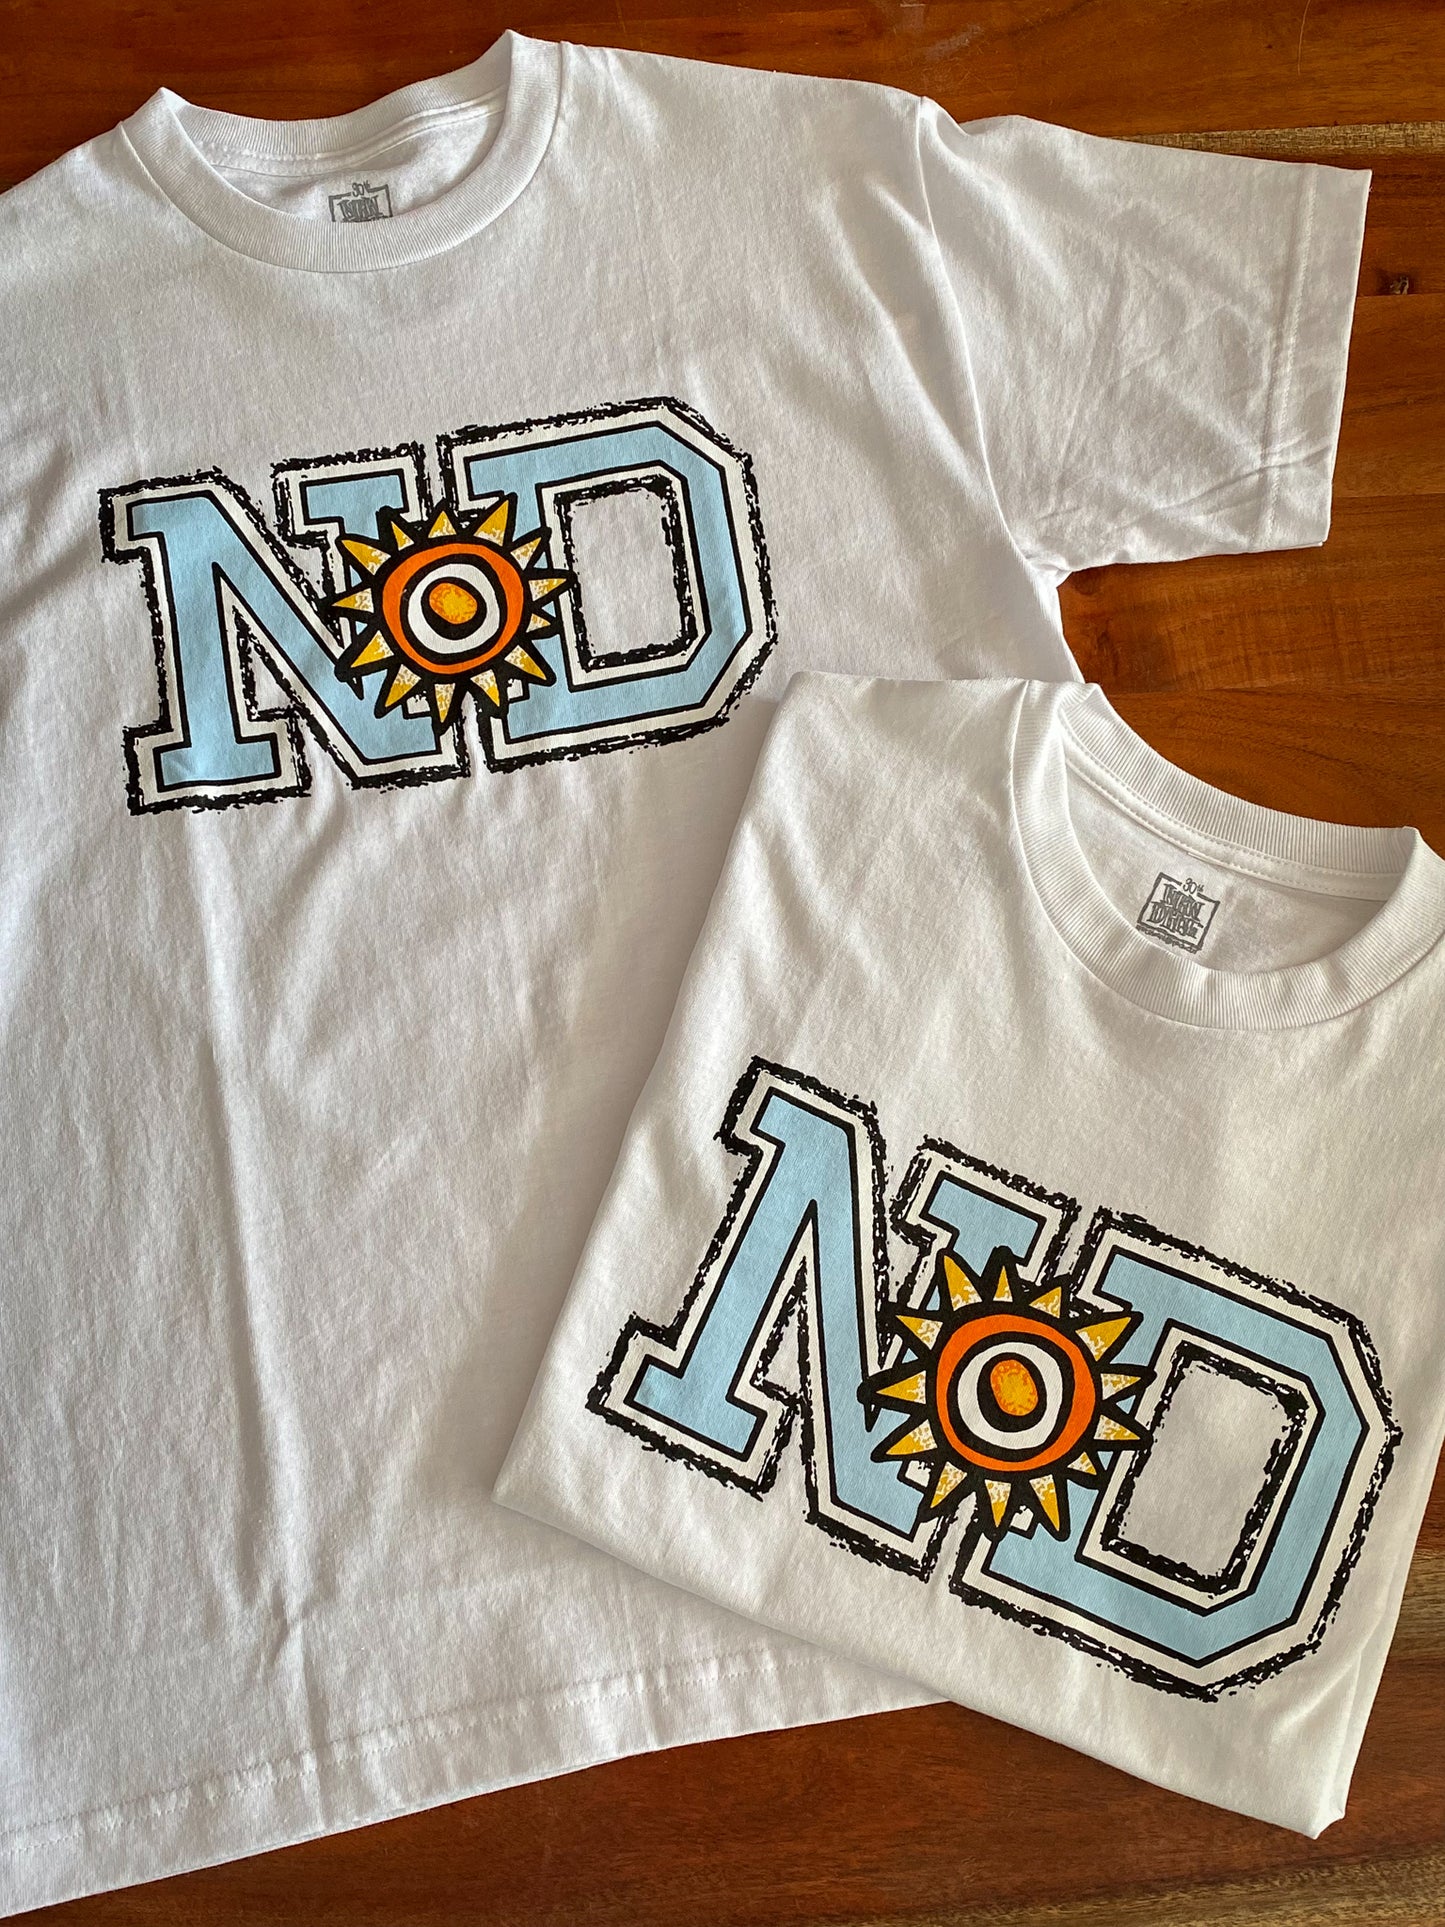 NEW DEAL - ND TEE - WHITE